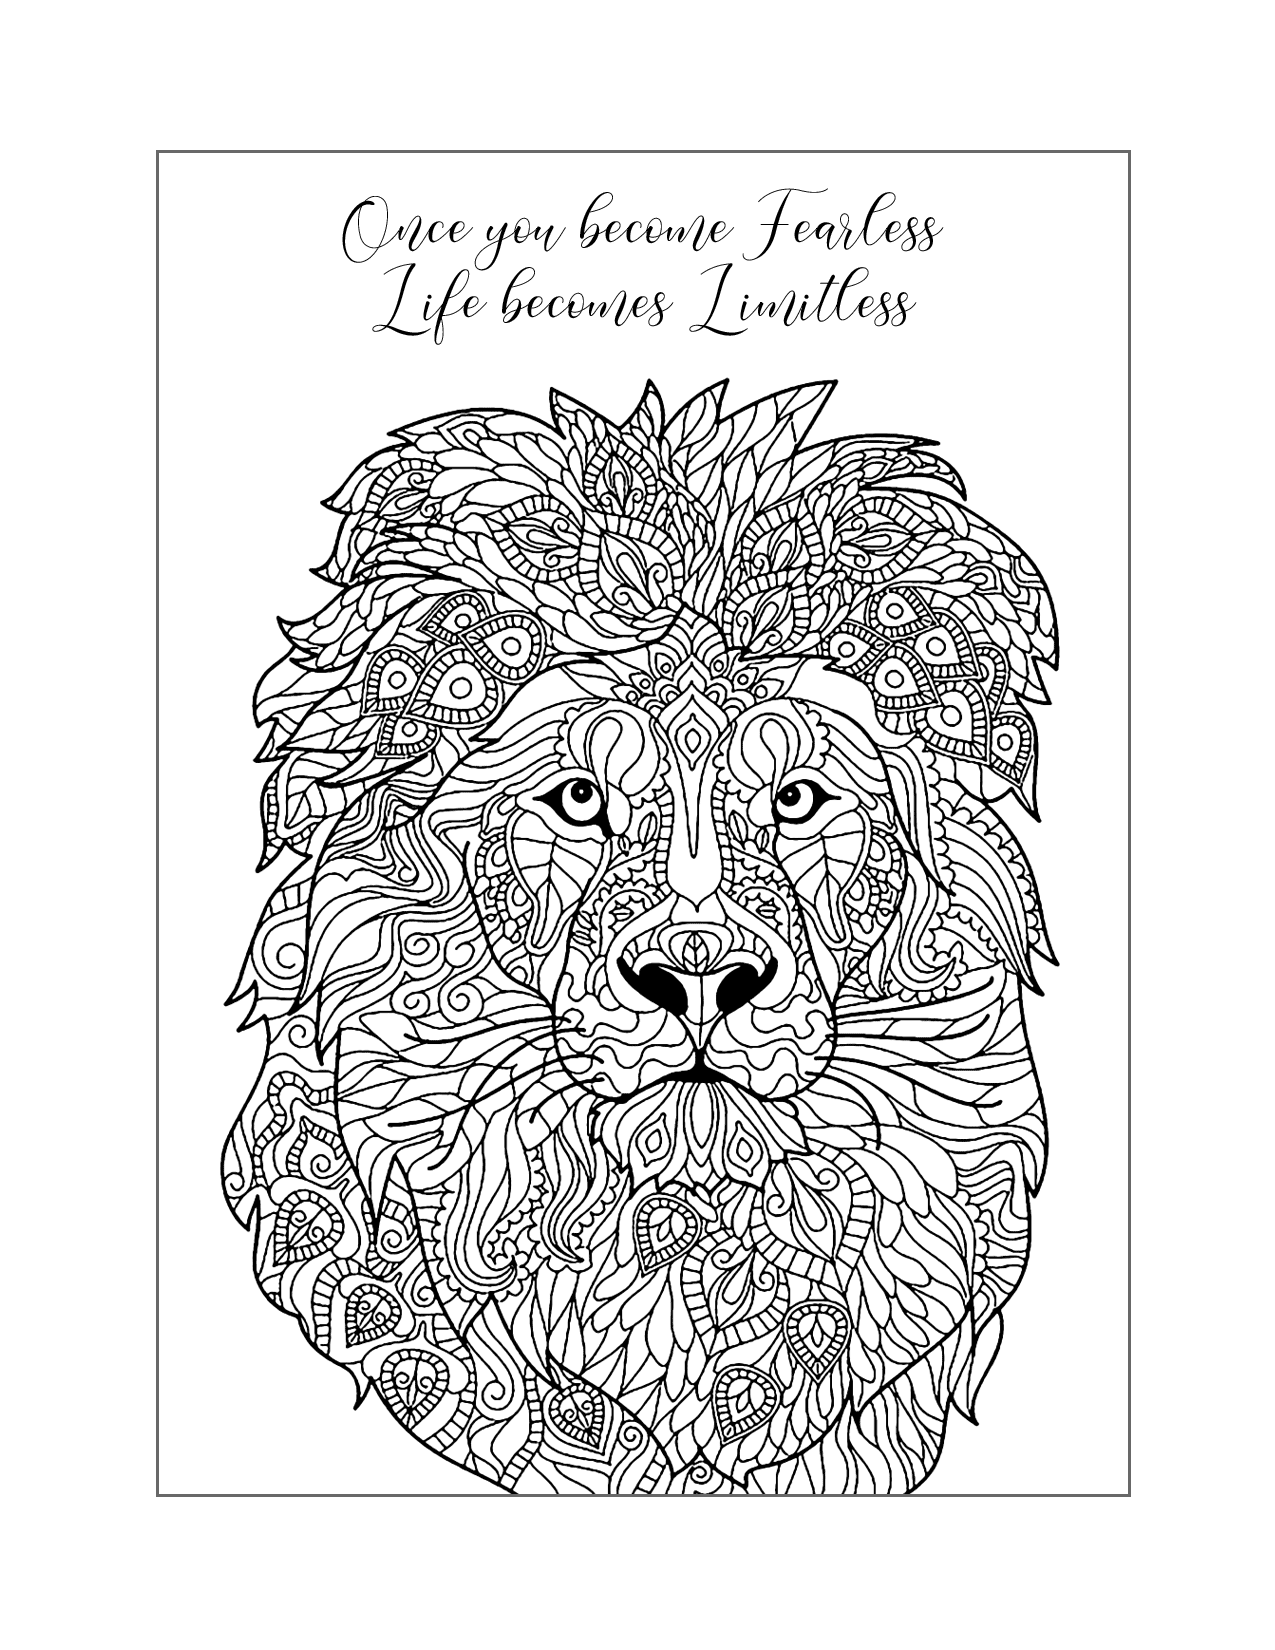 Zen Lion Quote Coloring Page For Adults